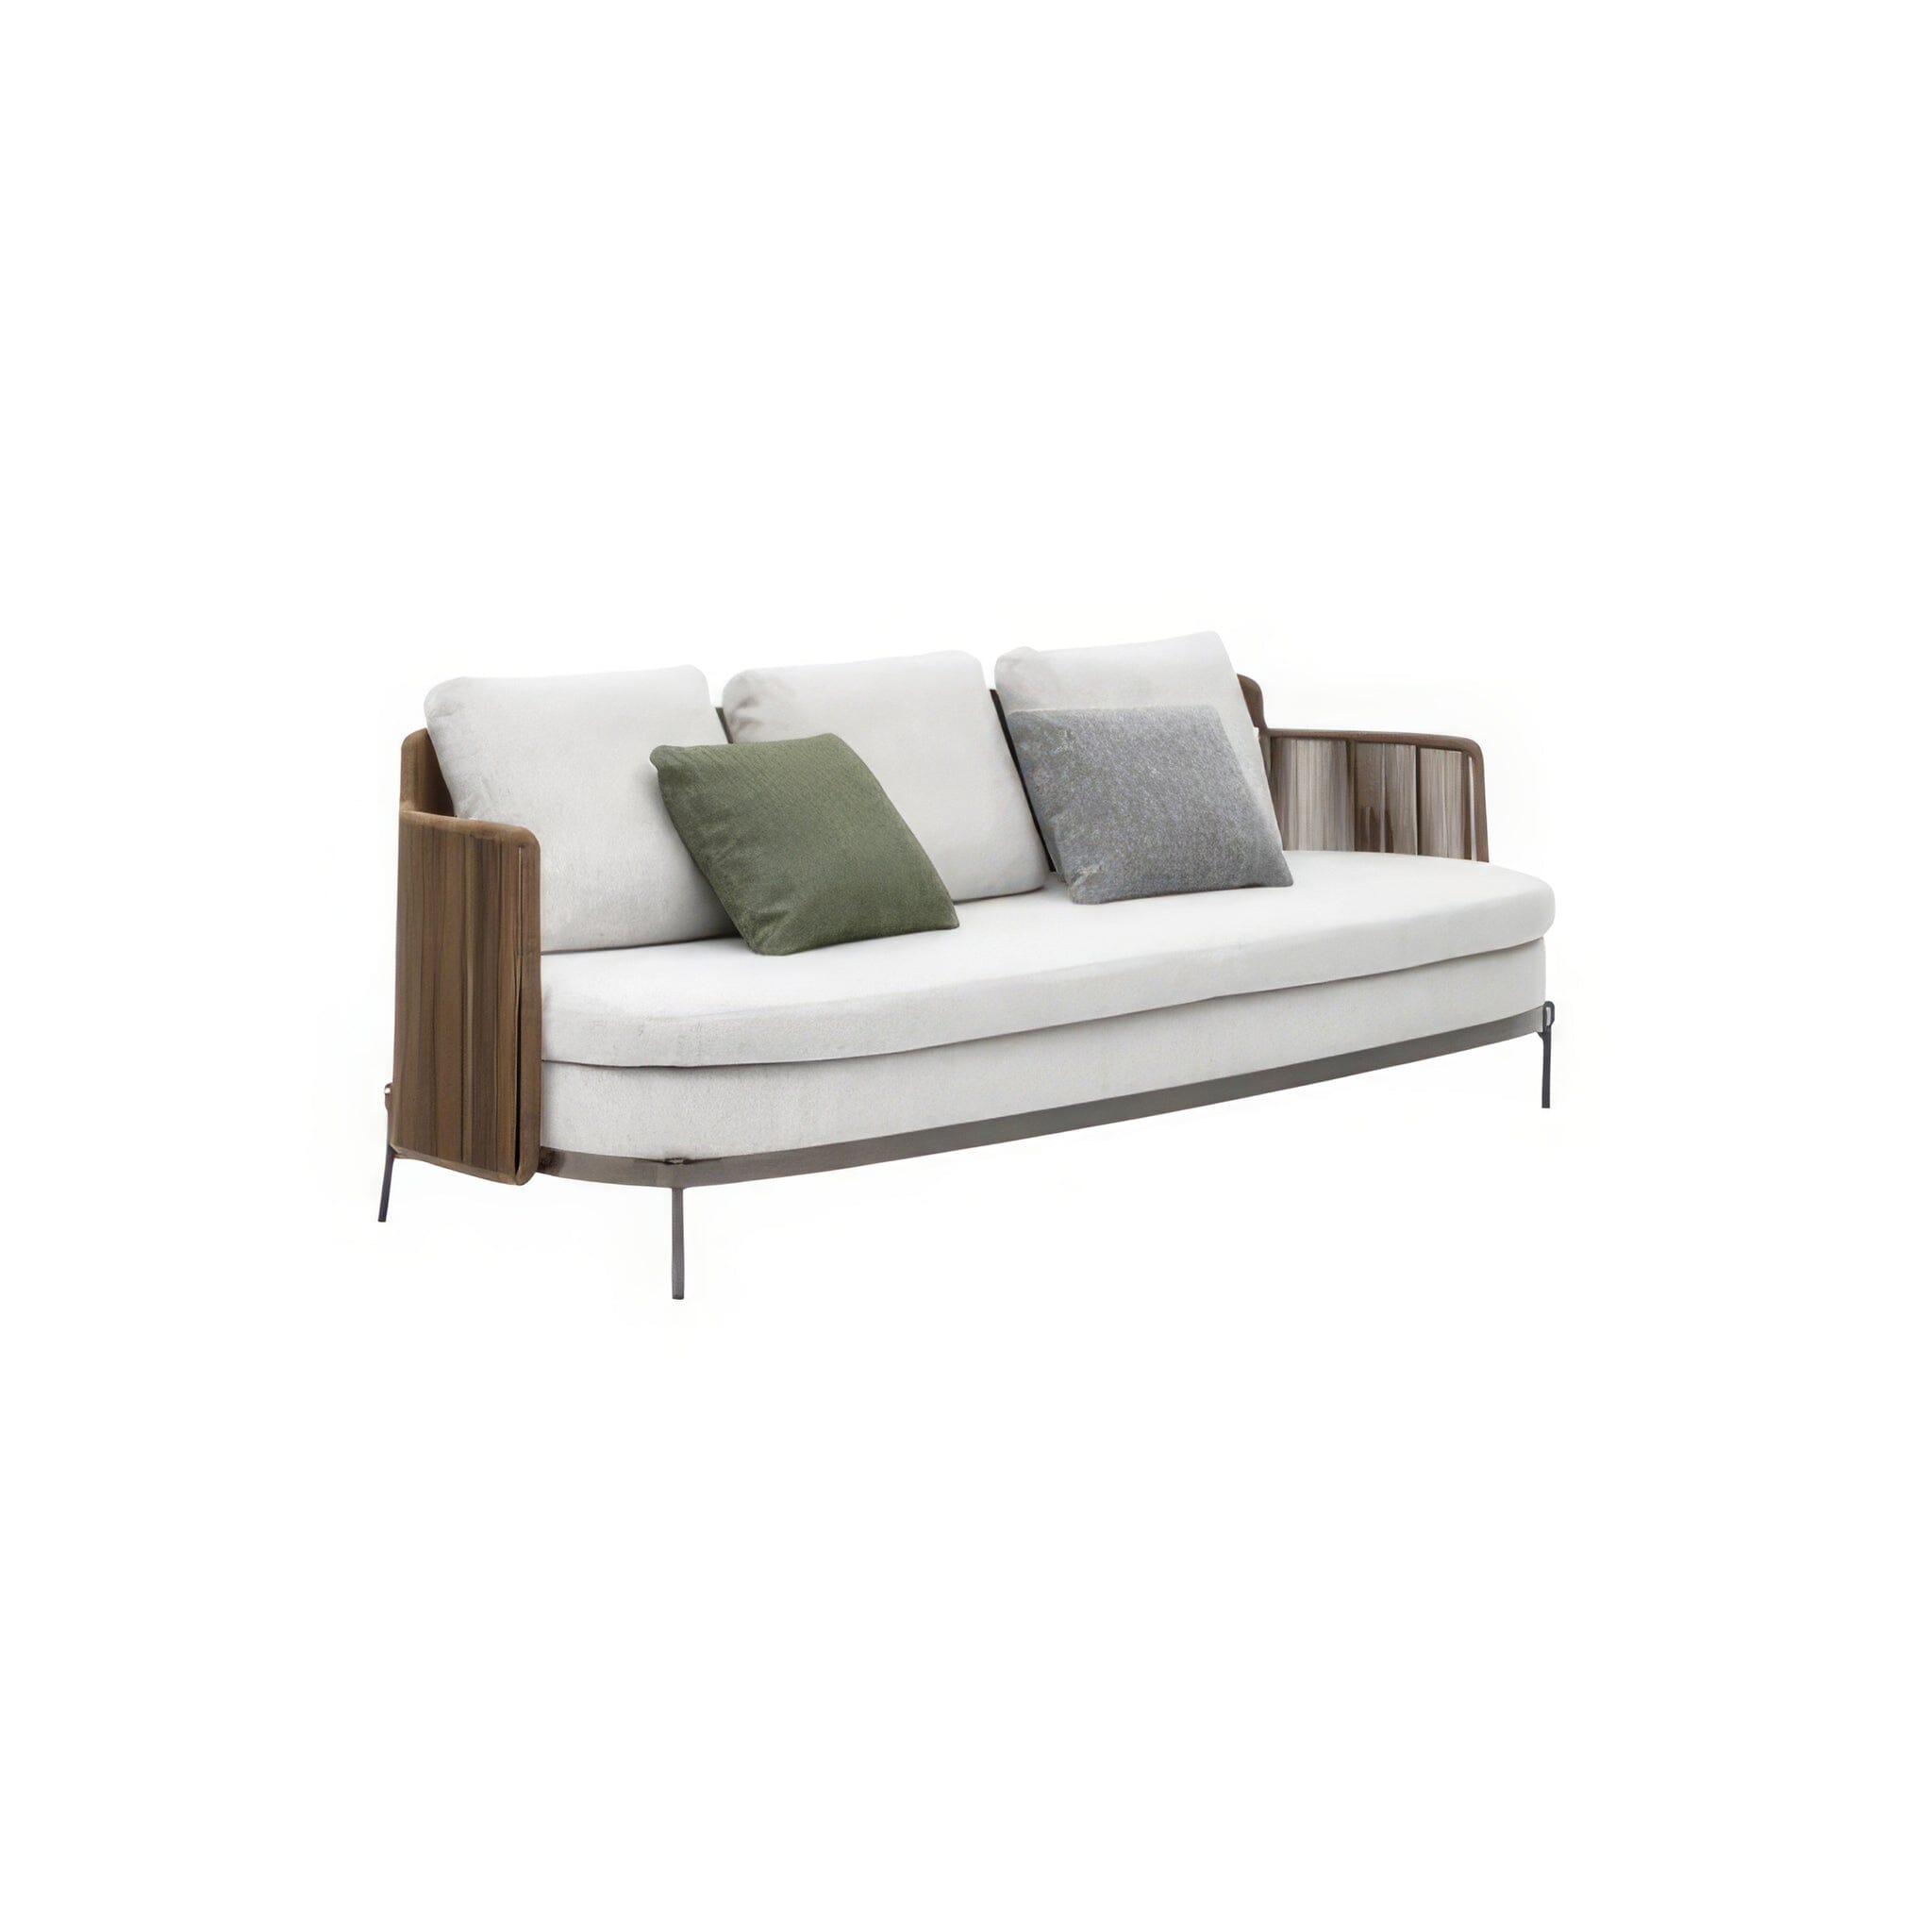 Lorraine Outdoor Collection (needs images) Sofa 